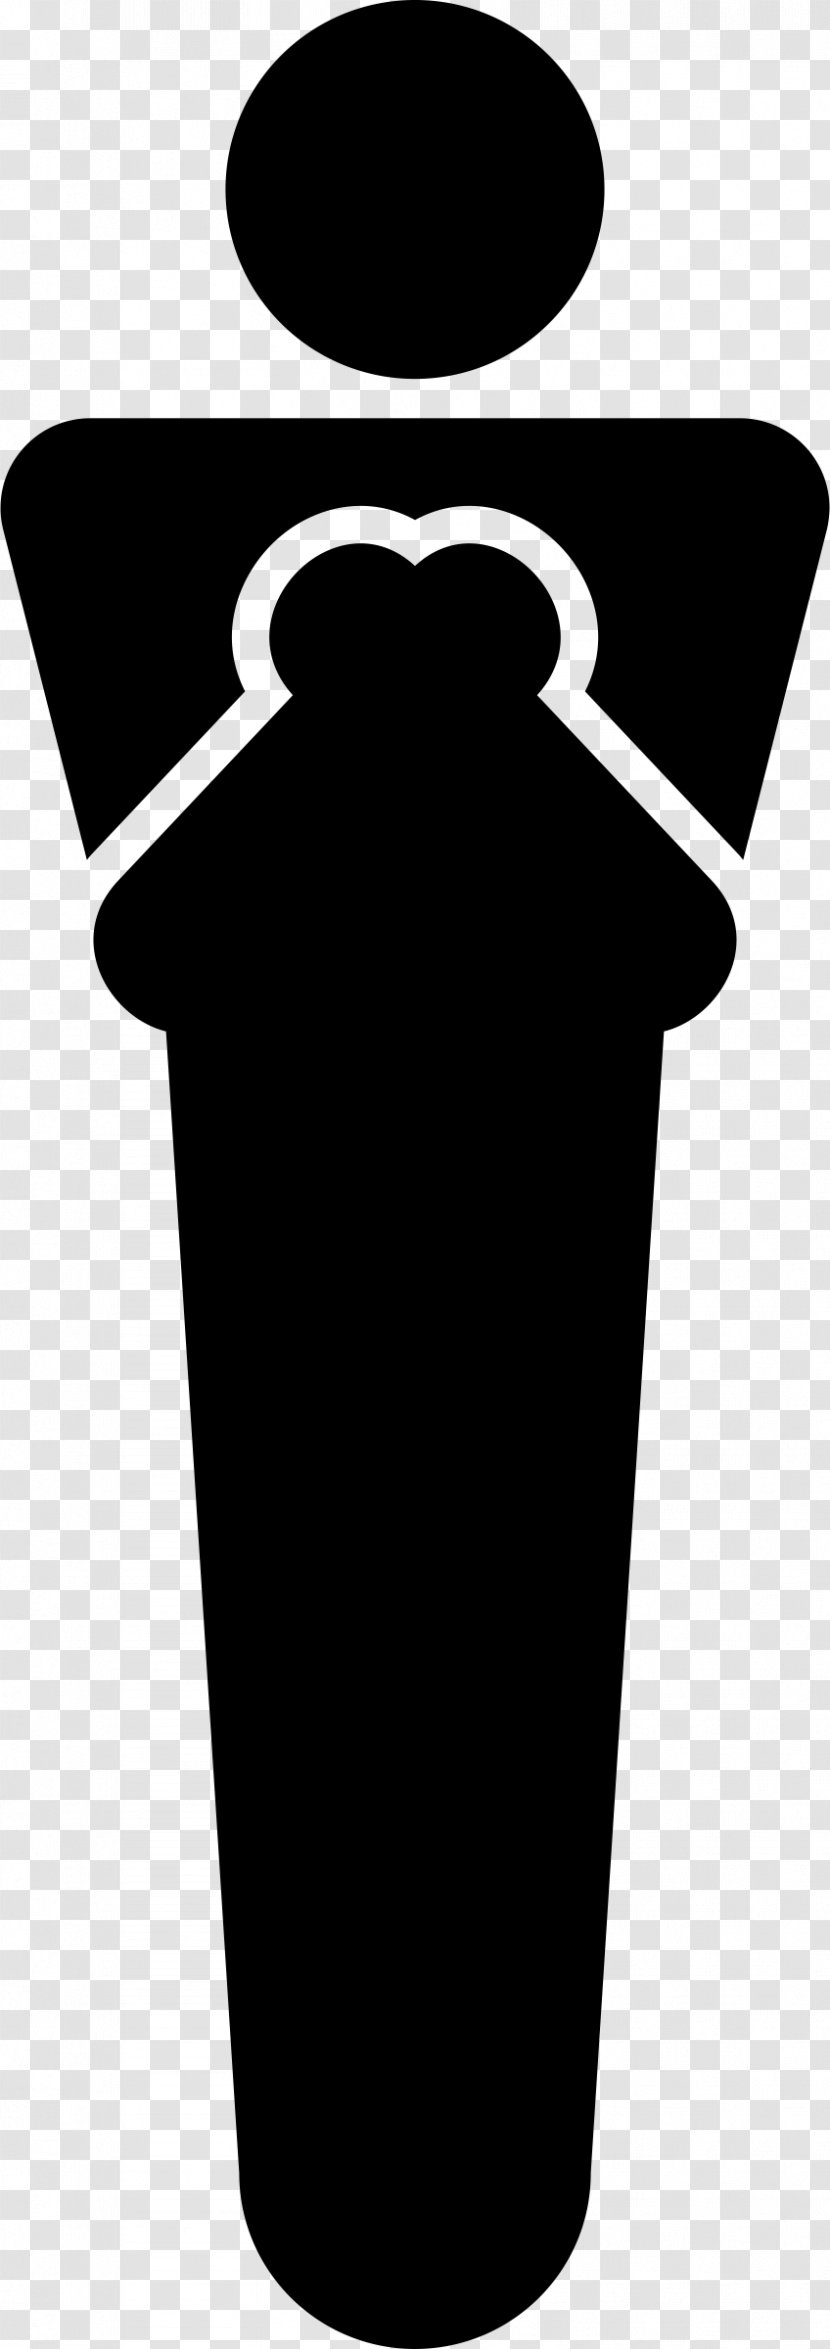 Mummy Embalming - Silhouette Transparent PNG